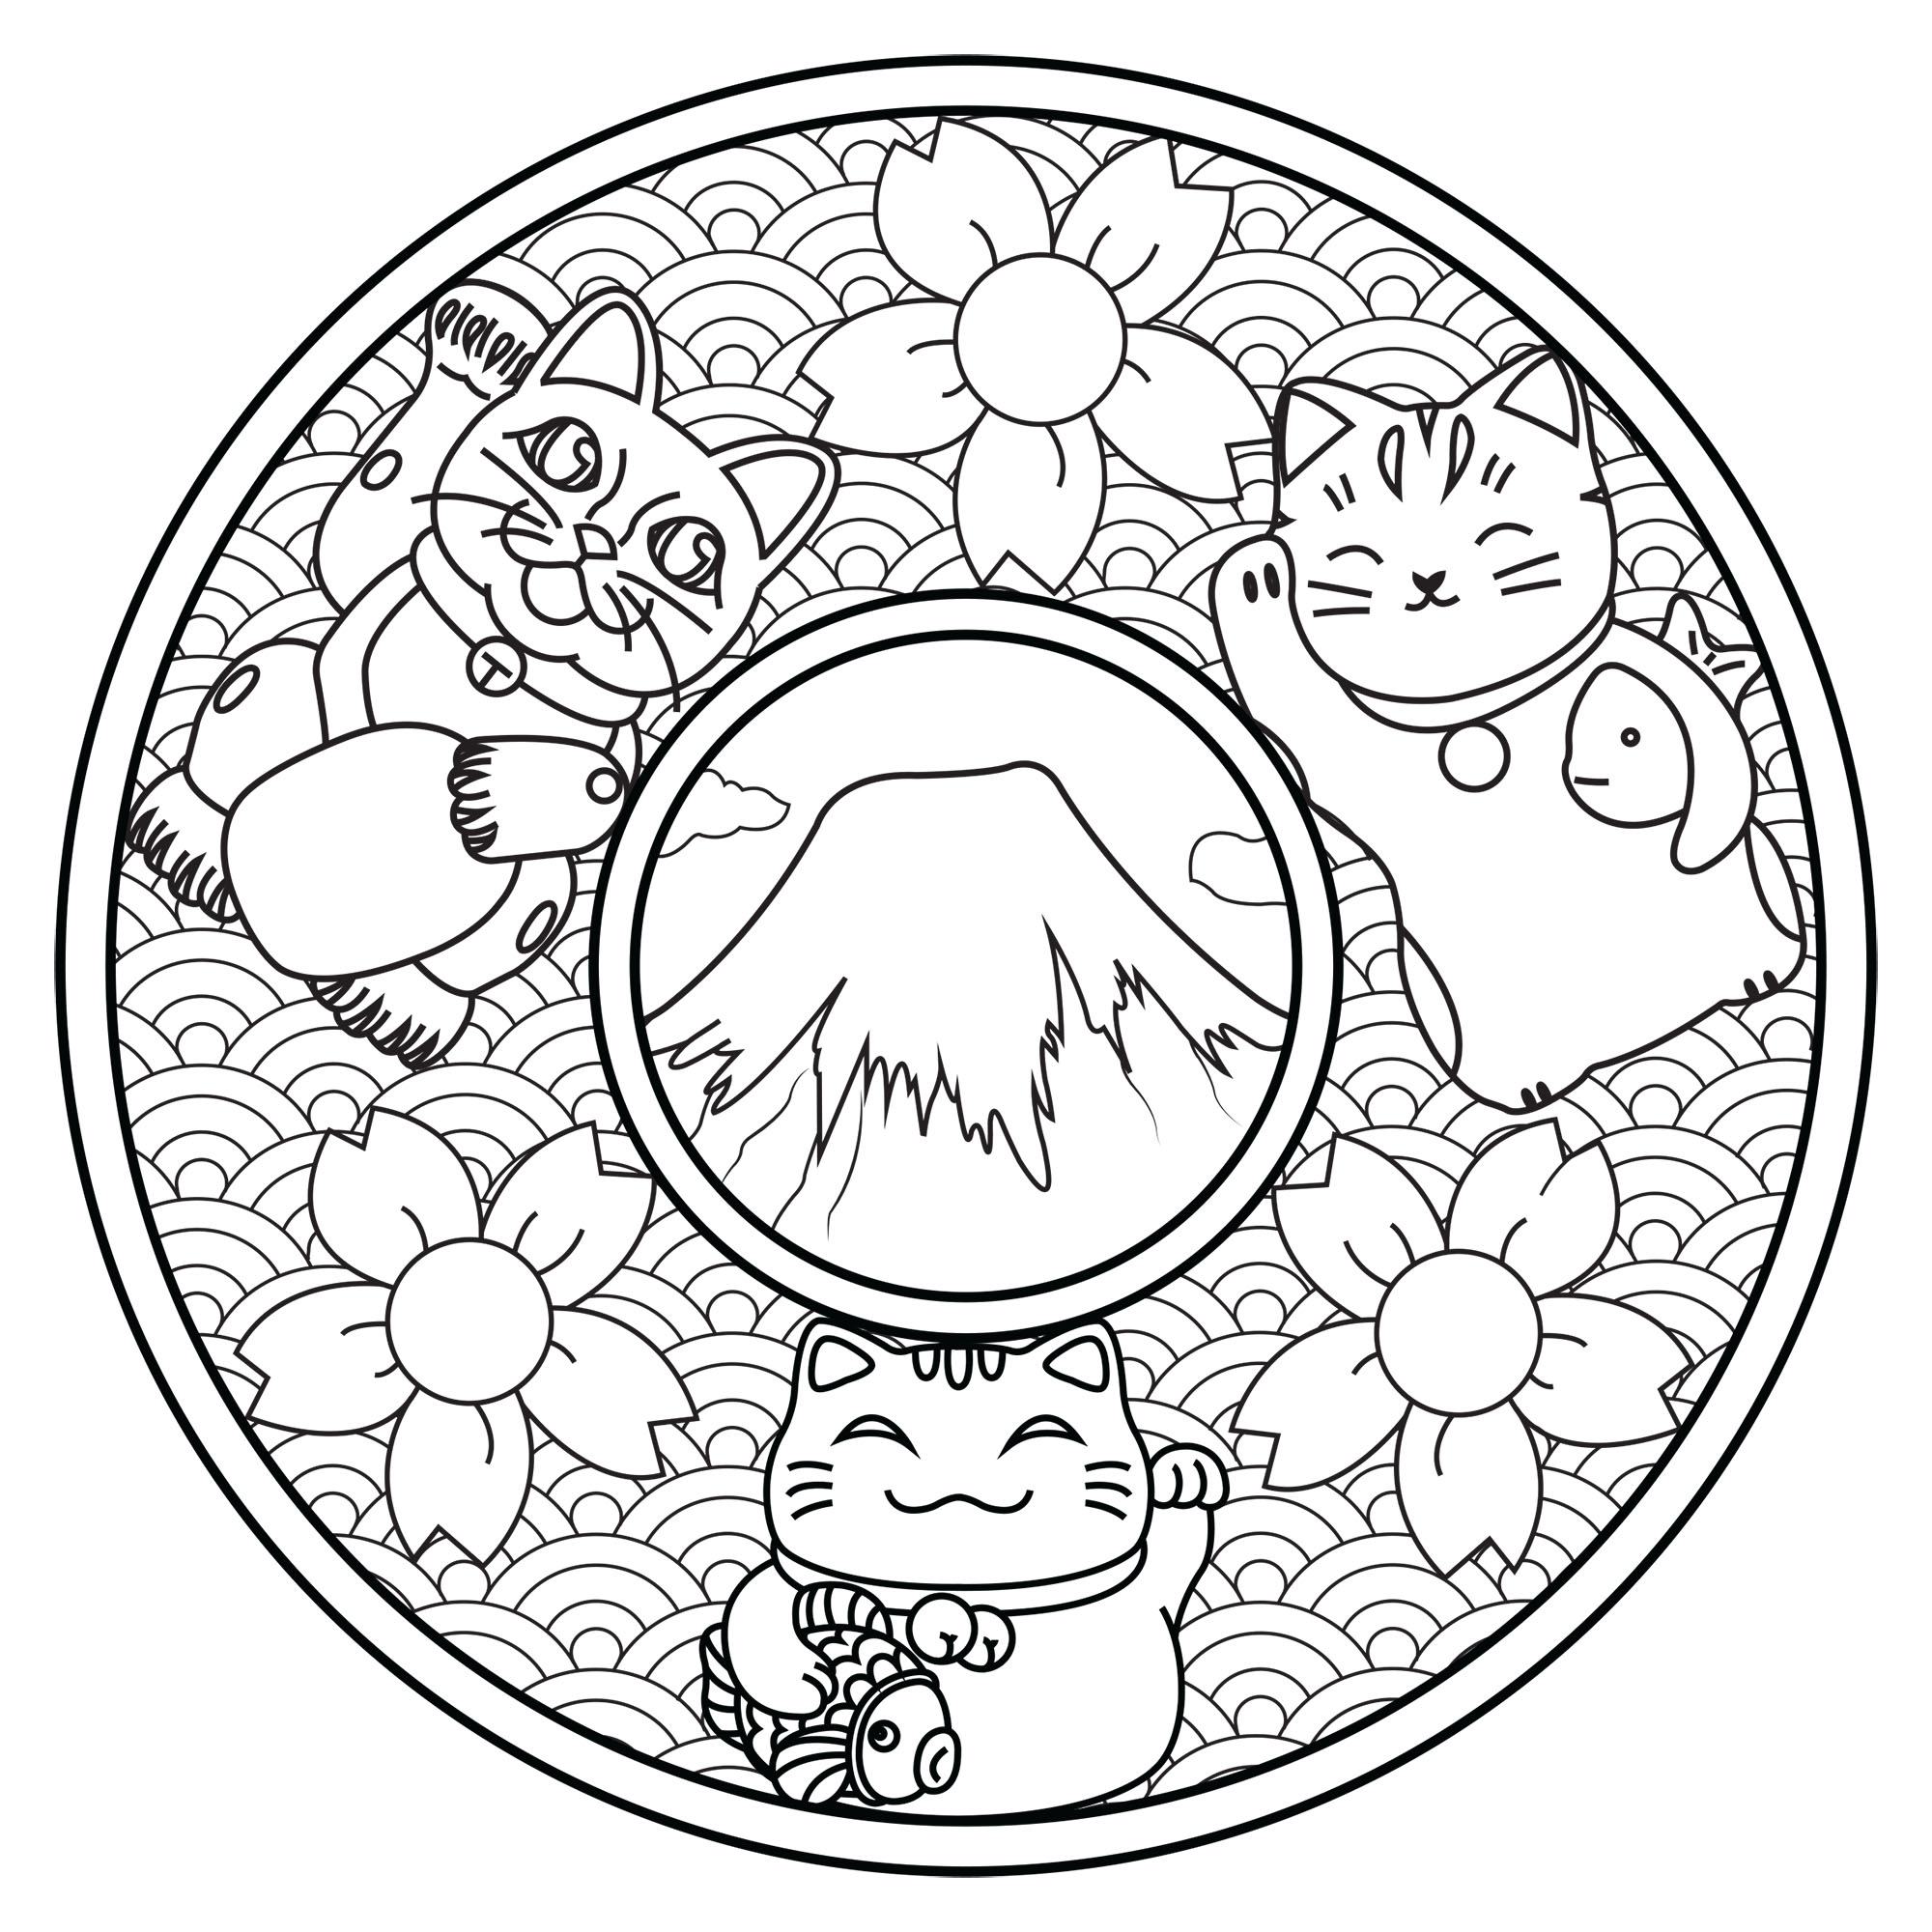 7400 Top Lucky Cat Coloring Pages Images & Pictures In HD